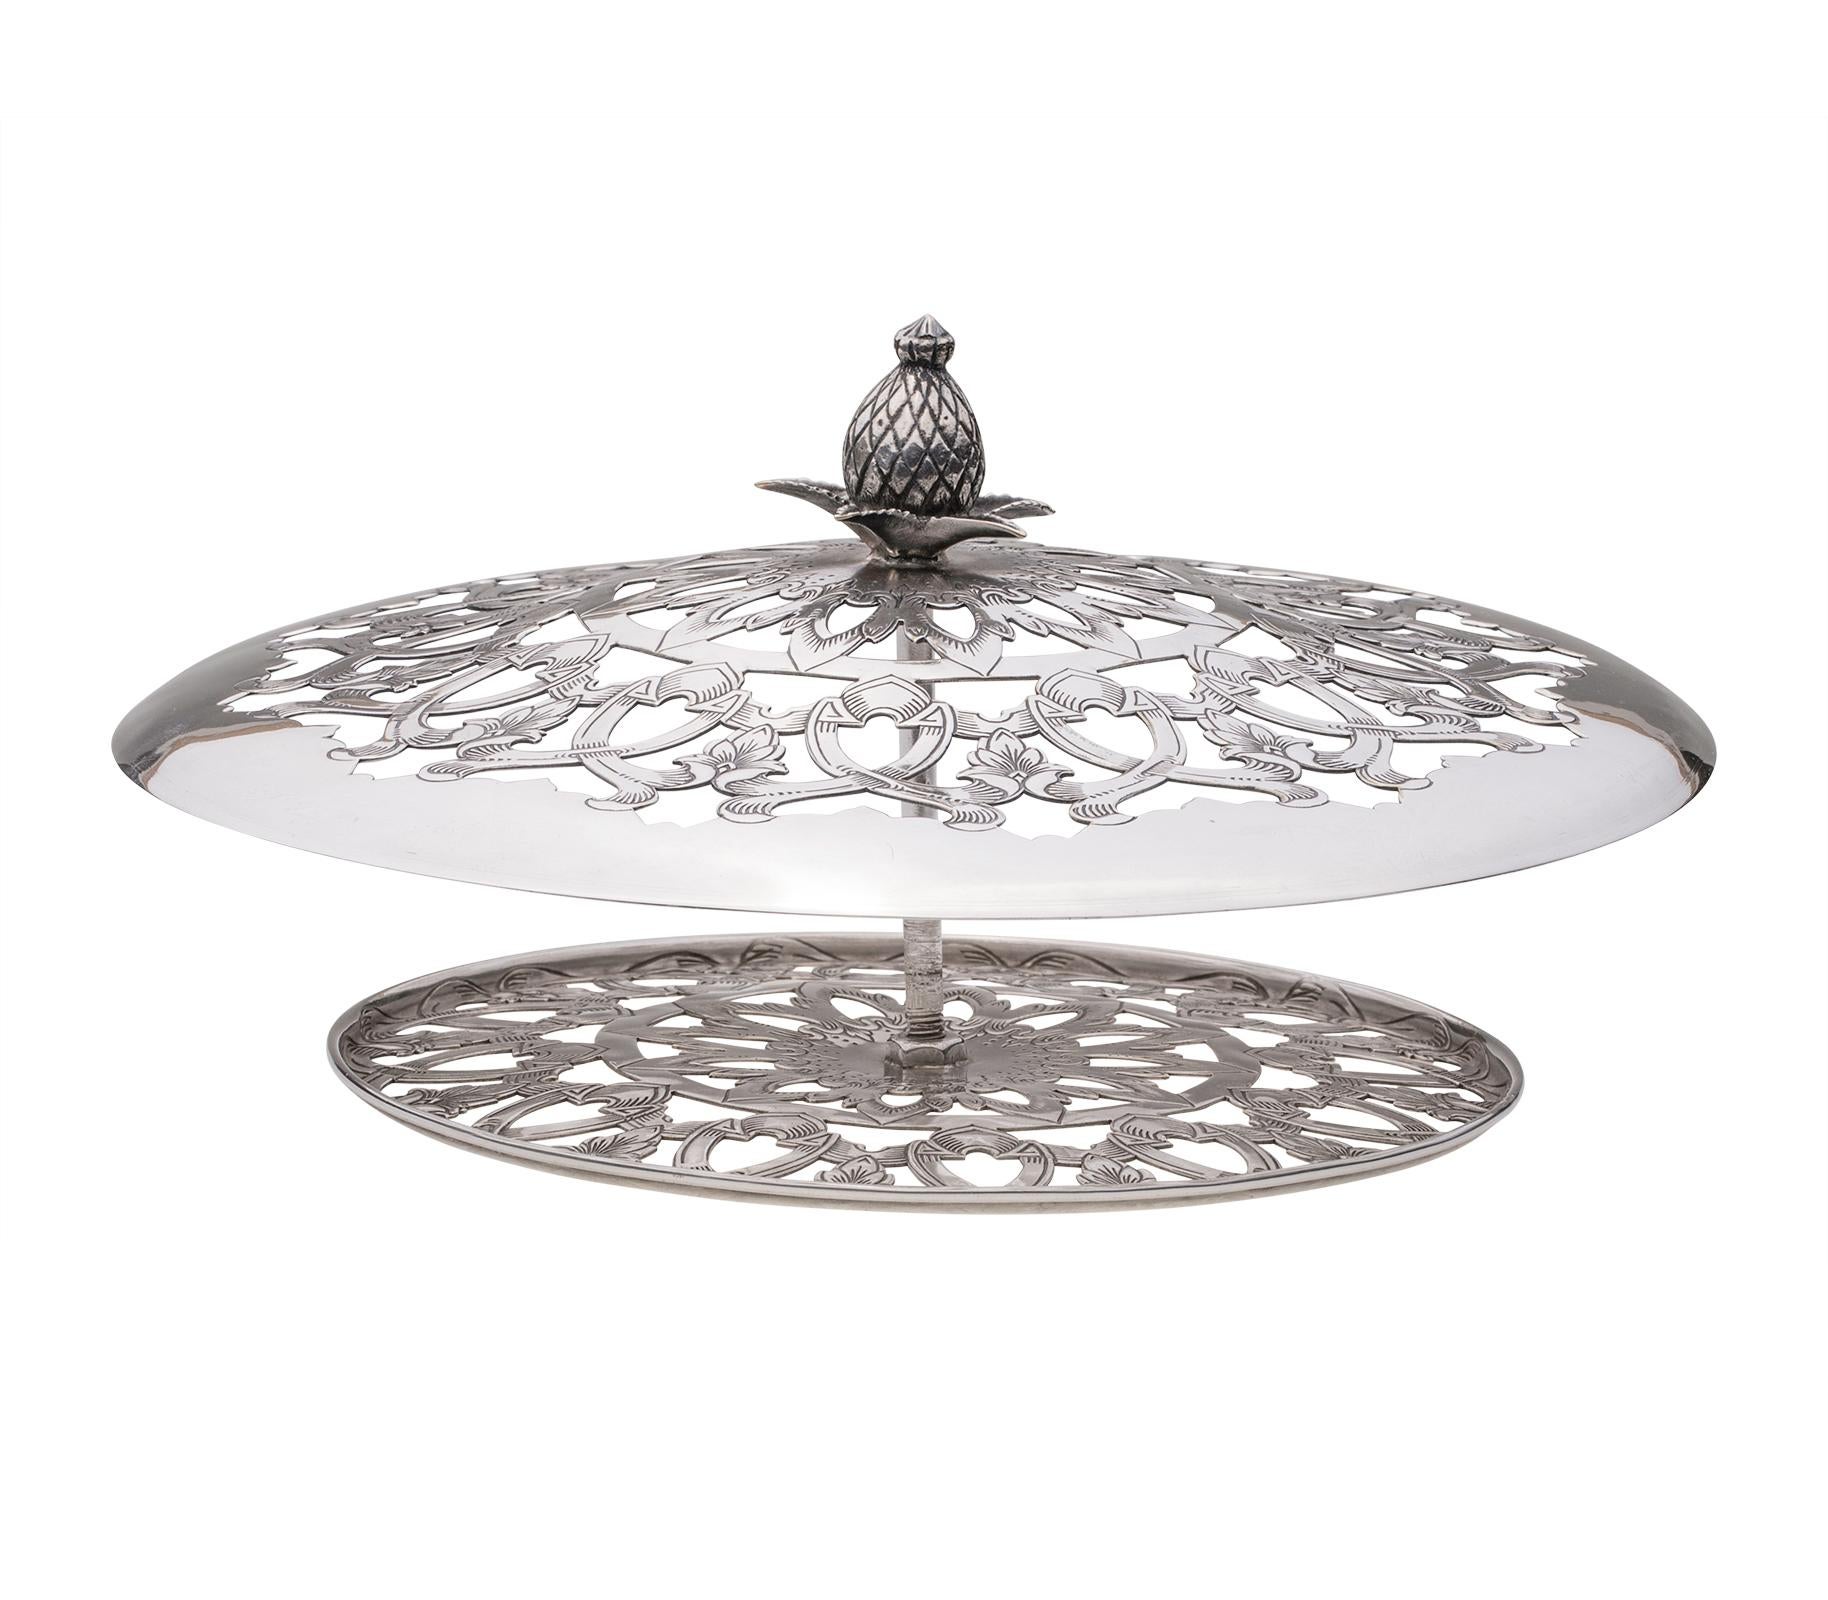 All solid Sterling Silver flower frog bowl by Shreve Treat & Co. double lid is pierced in floral design for placing cut flowers. Pineapple shaped center knob for easy lid removal. A very beautiful and decorative centerpiece for your table.